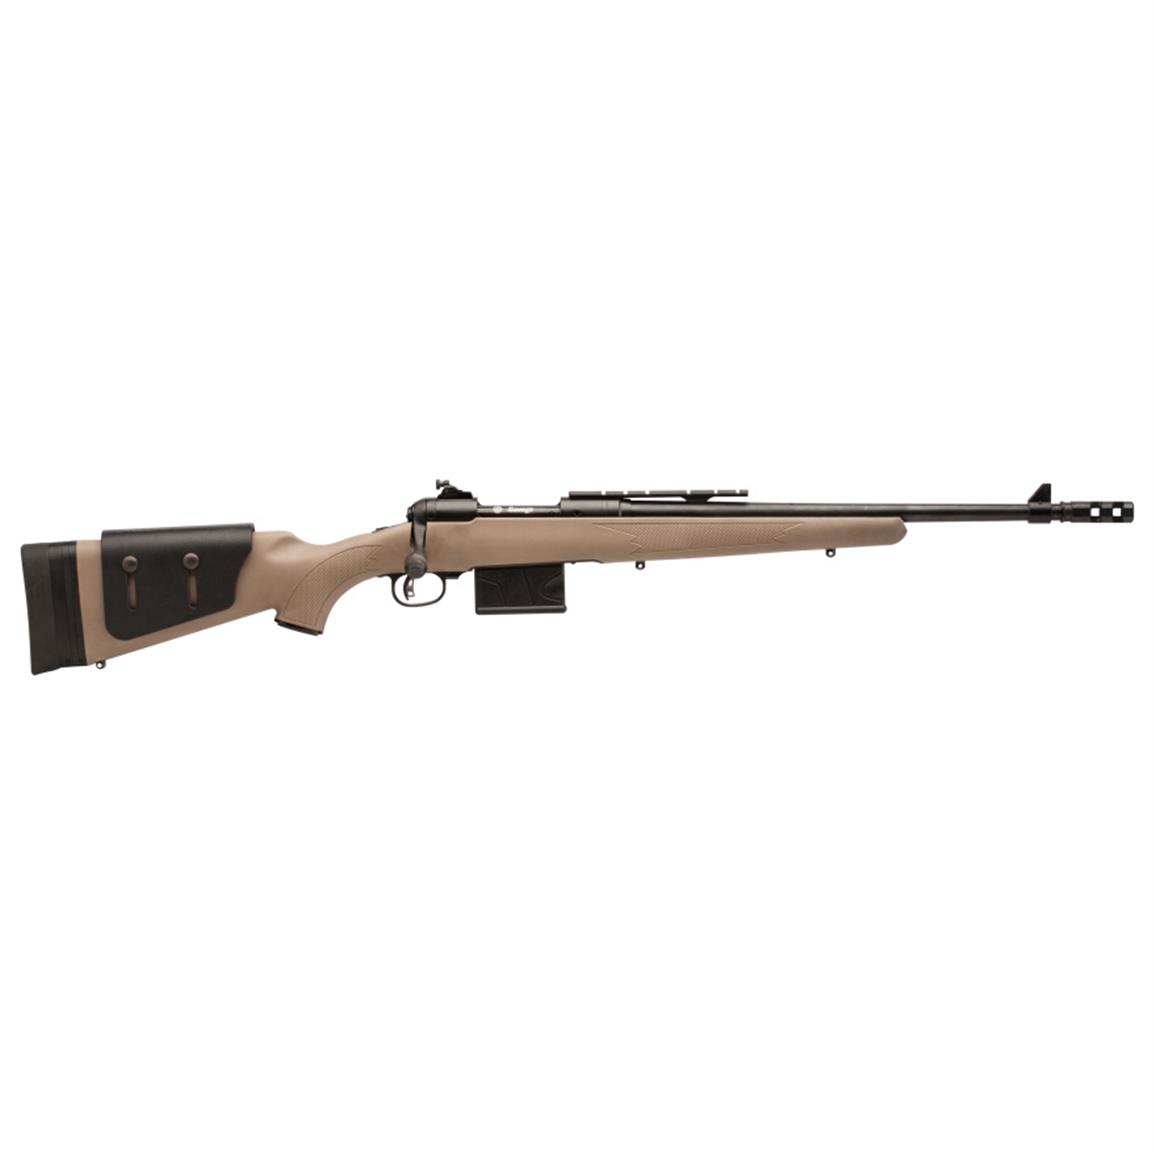 Savage 11 Scout, Bolt Action, .308 Winchester, Centerfire, 22443, 11356224439